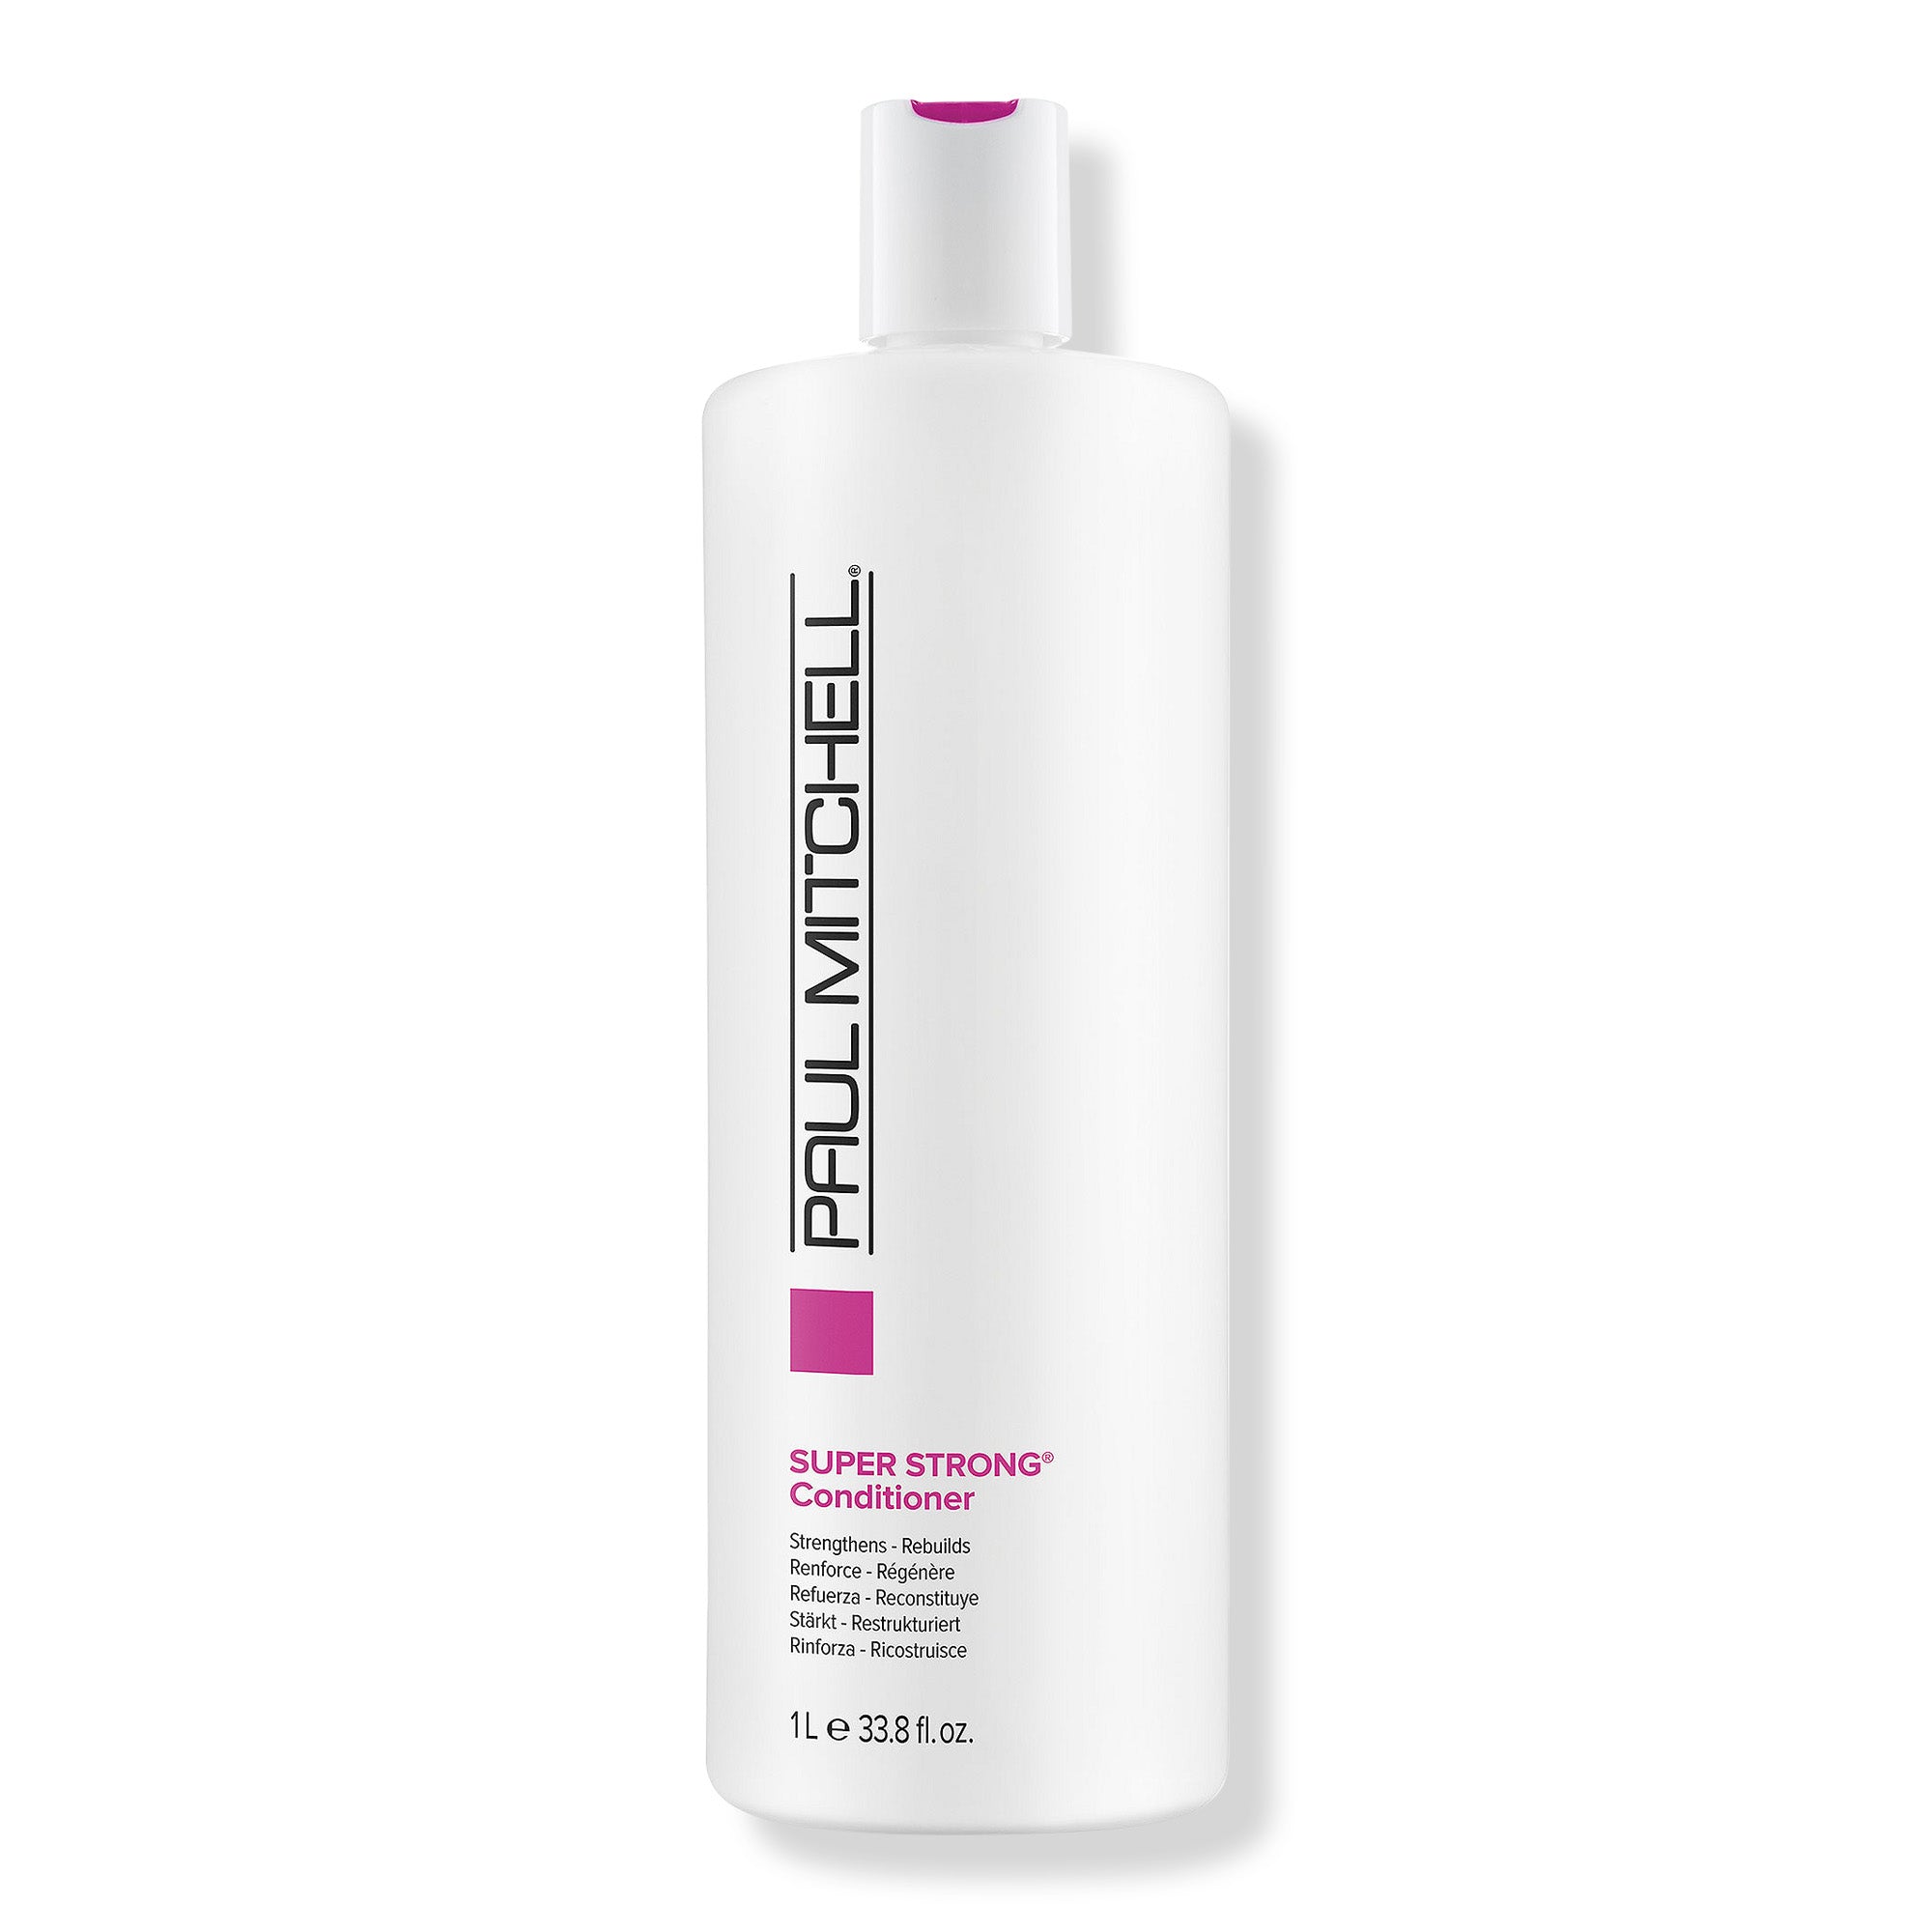 Paul Mitchell Strength Super Strong Shampoo & Conditioner Duo ($67.50 Value) / LITER